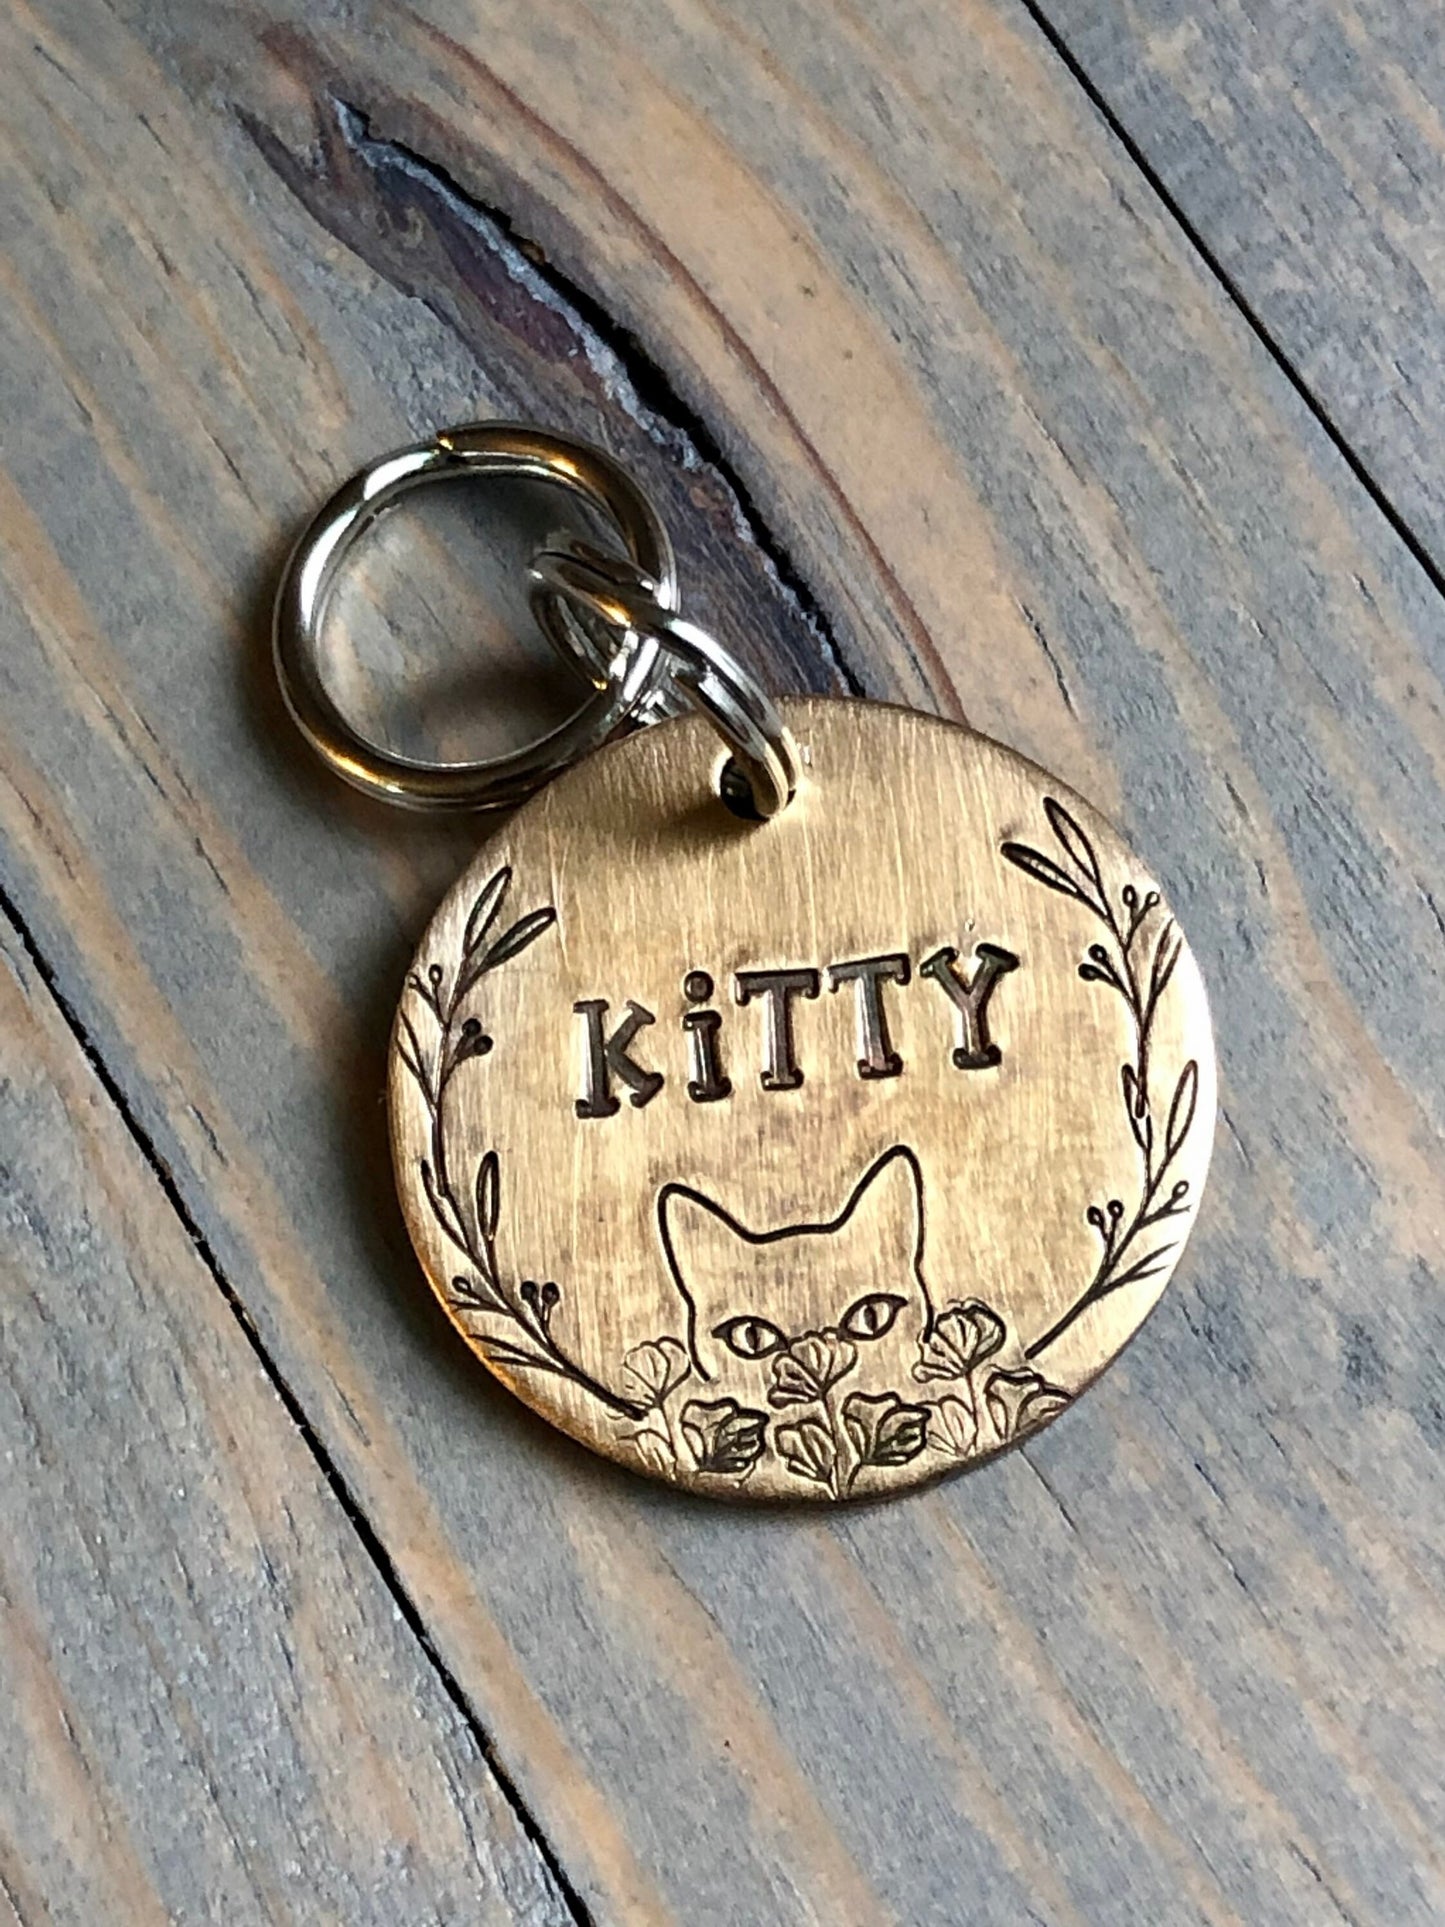 Name Tag for Cat, Hand Stamped Pet ID Tag, Kitty, Personalized Cat Tag for Kitty, Tag with Flowers, Kitten